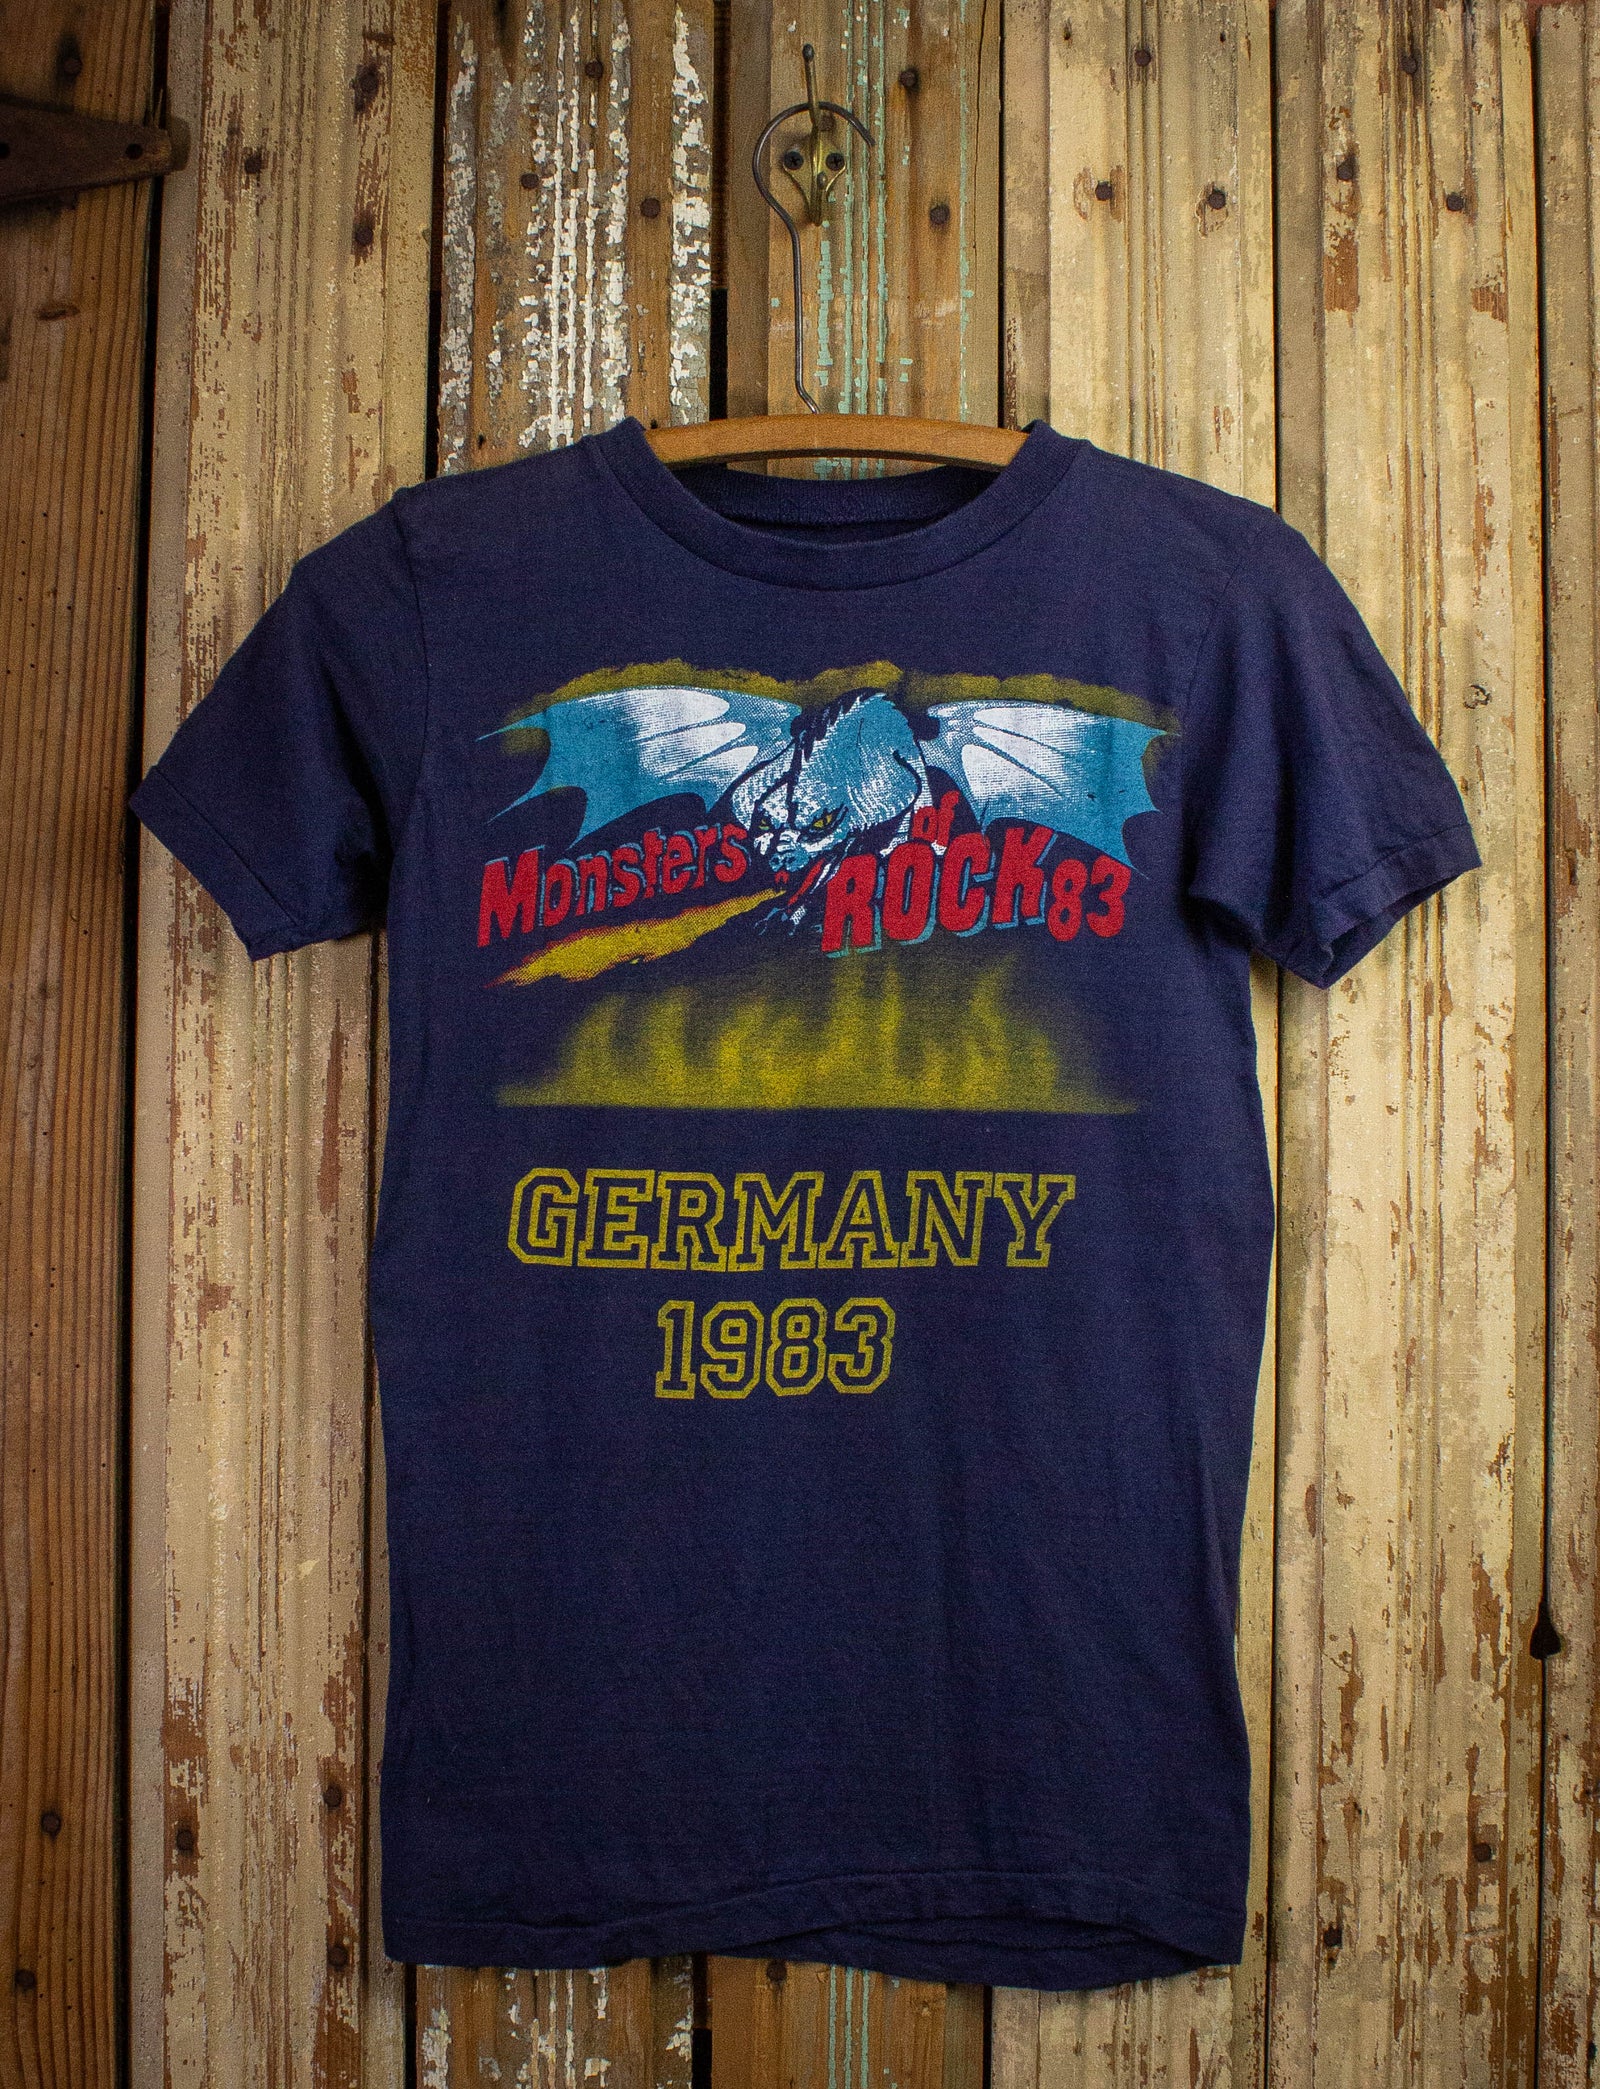 Vintage Monsters of Rock Germany Concert T Shirt 1983 Blue XS